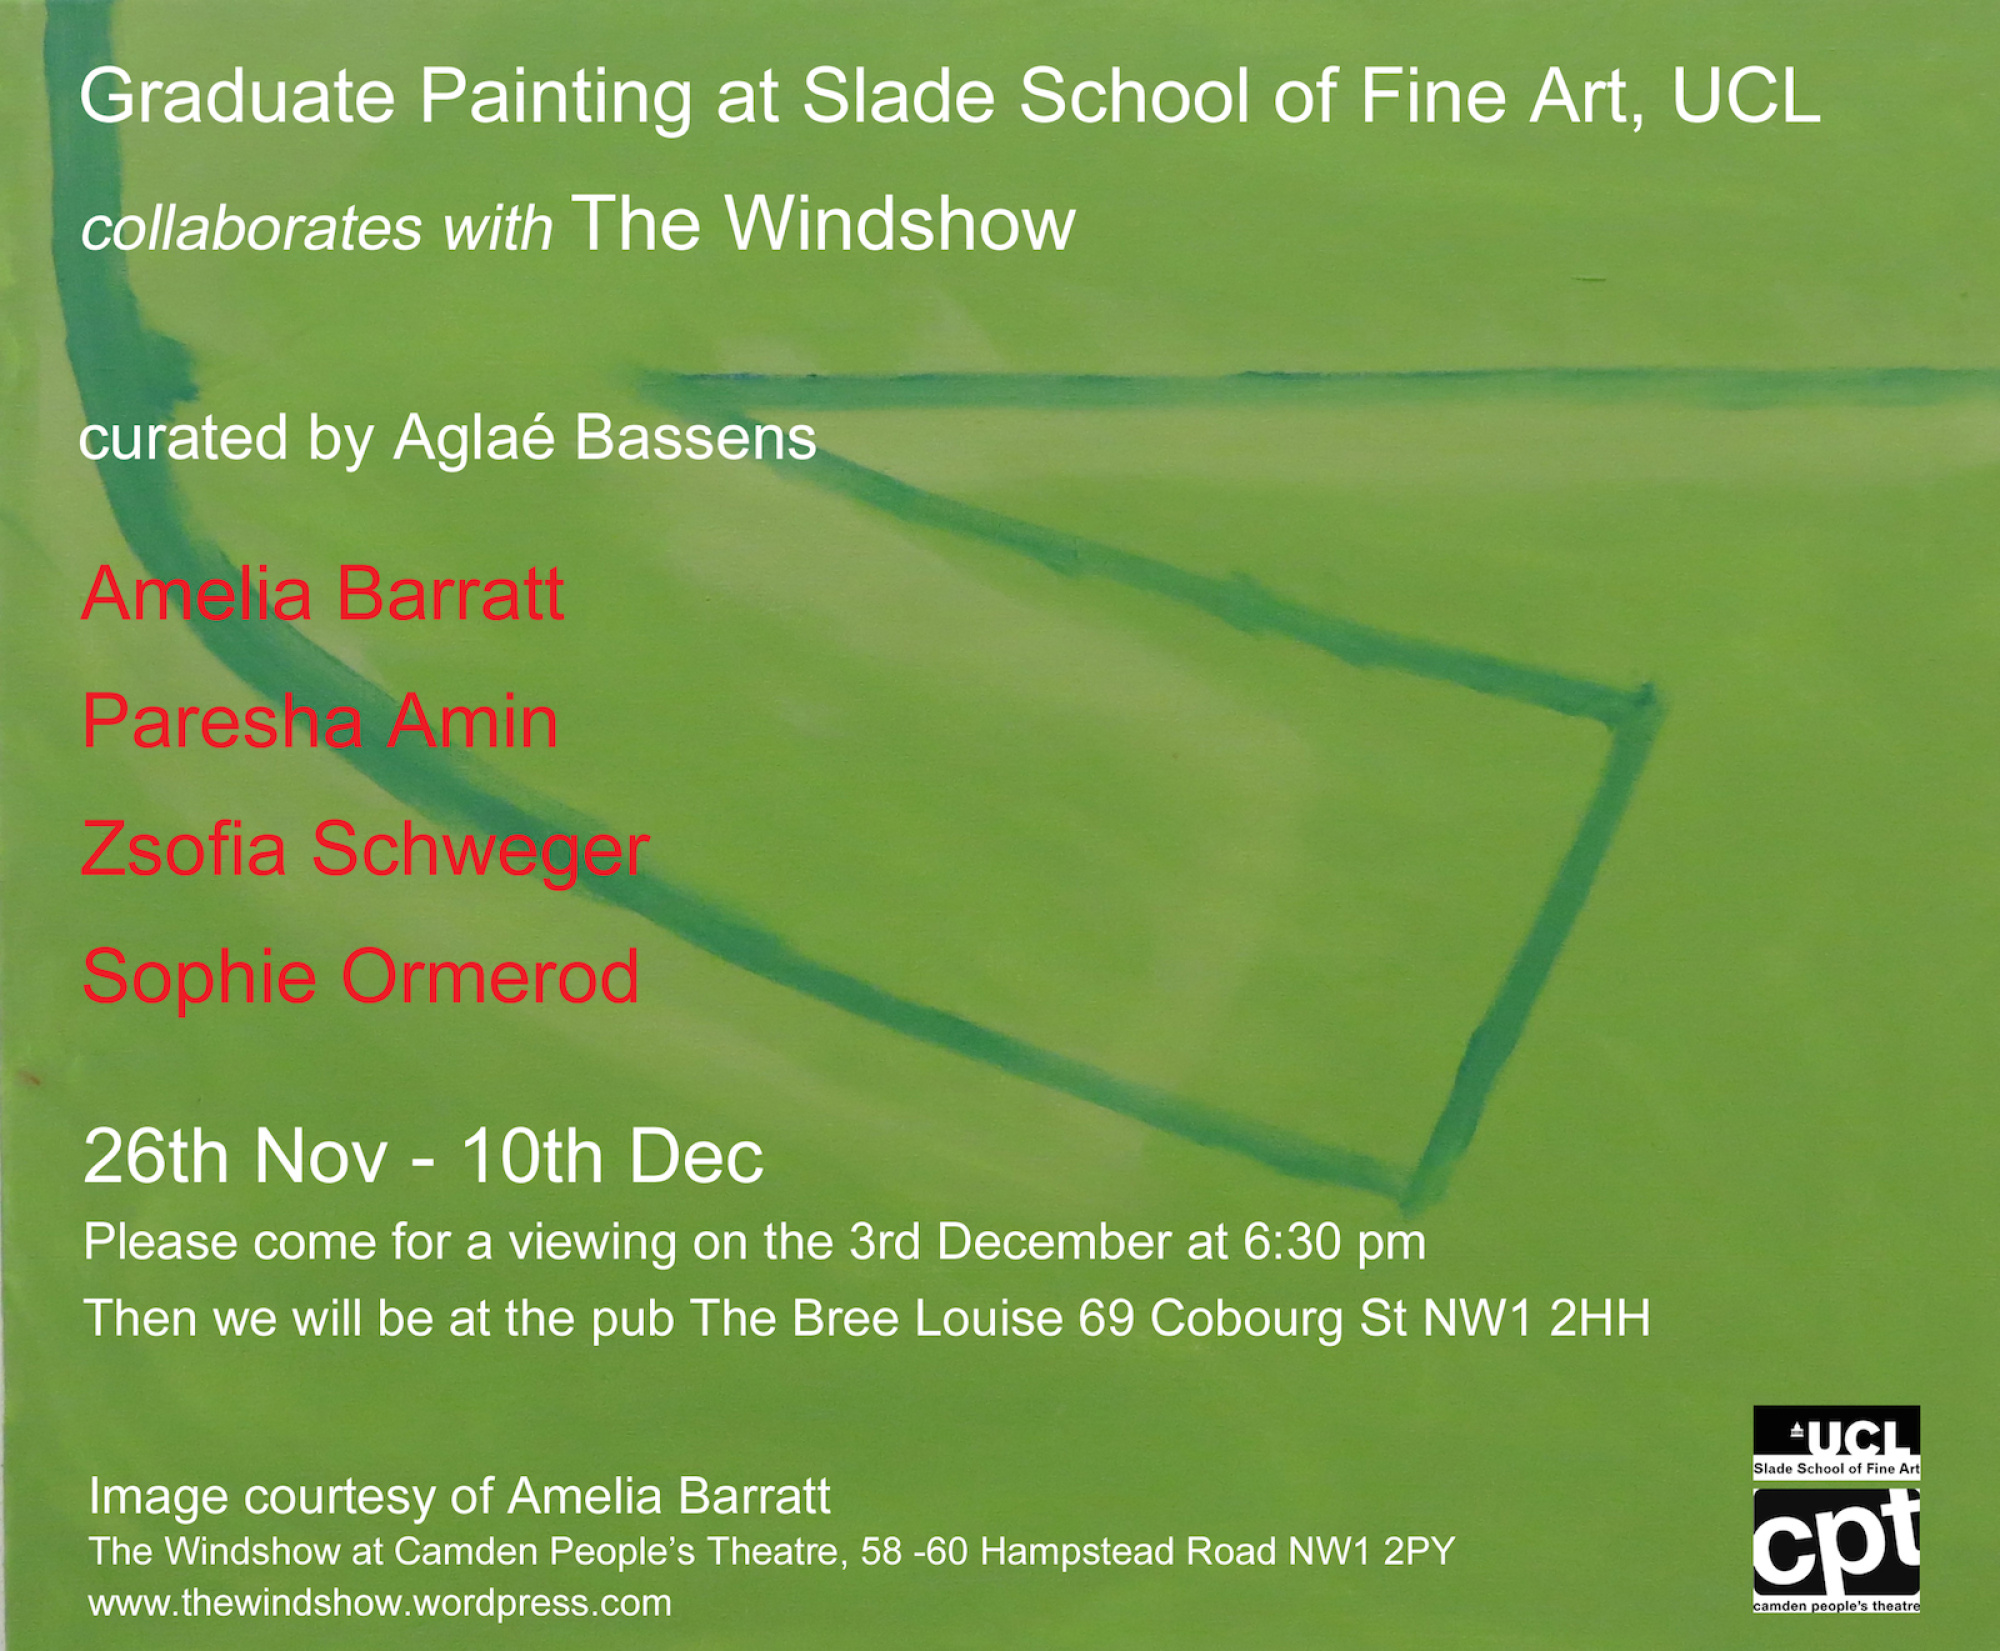 Graduate Painting collaborates with The Windshow 2014